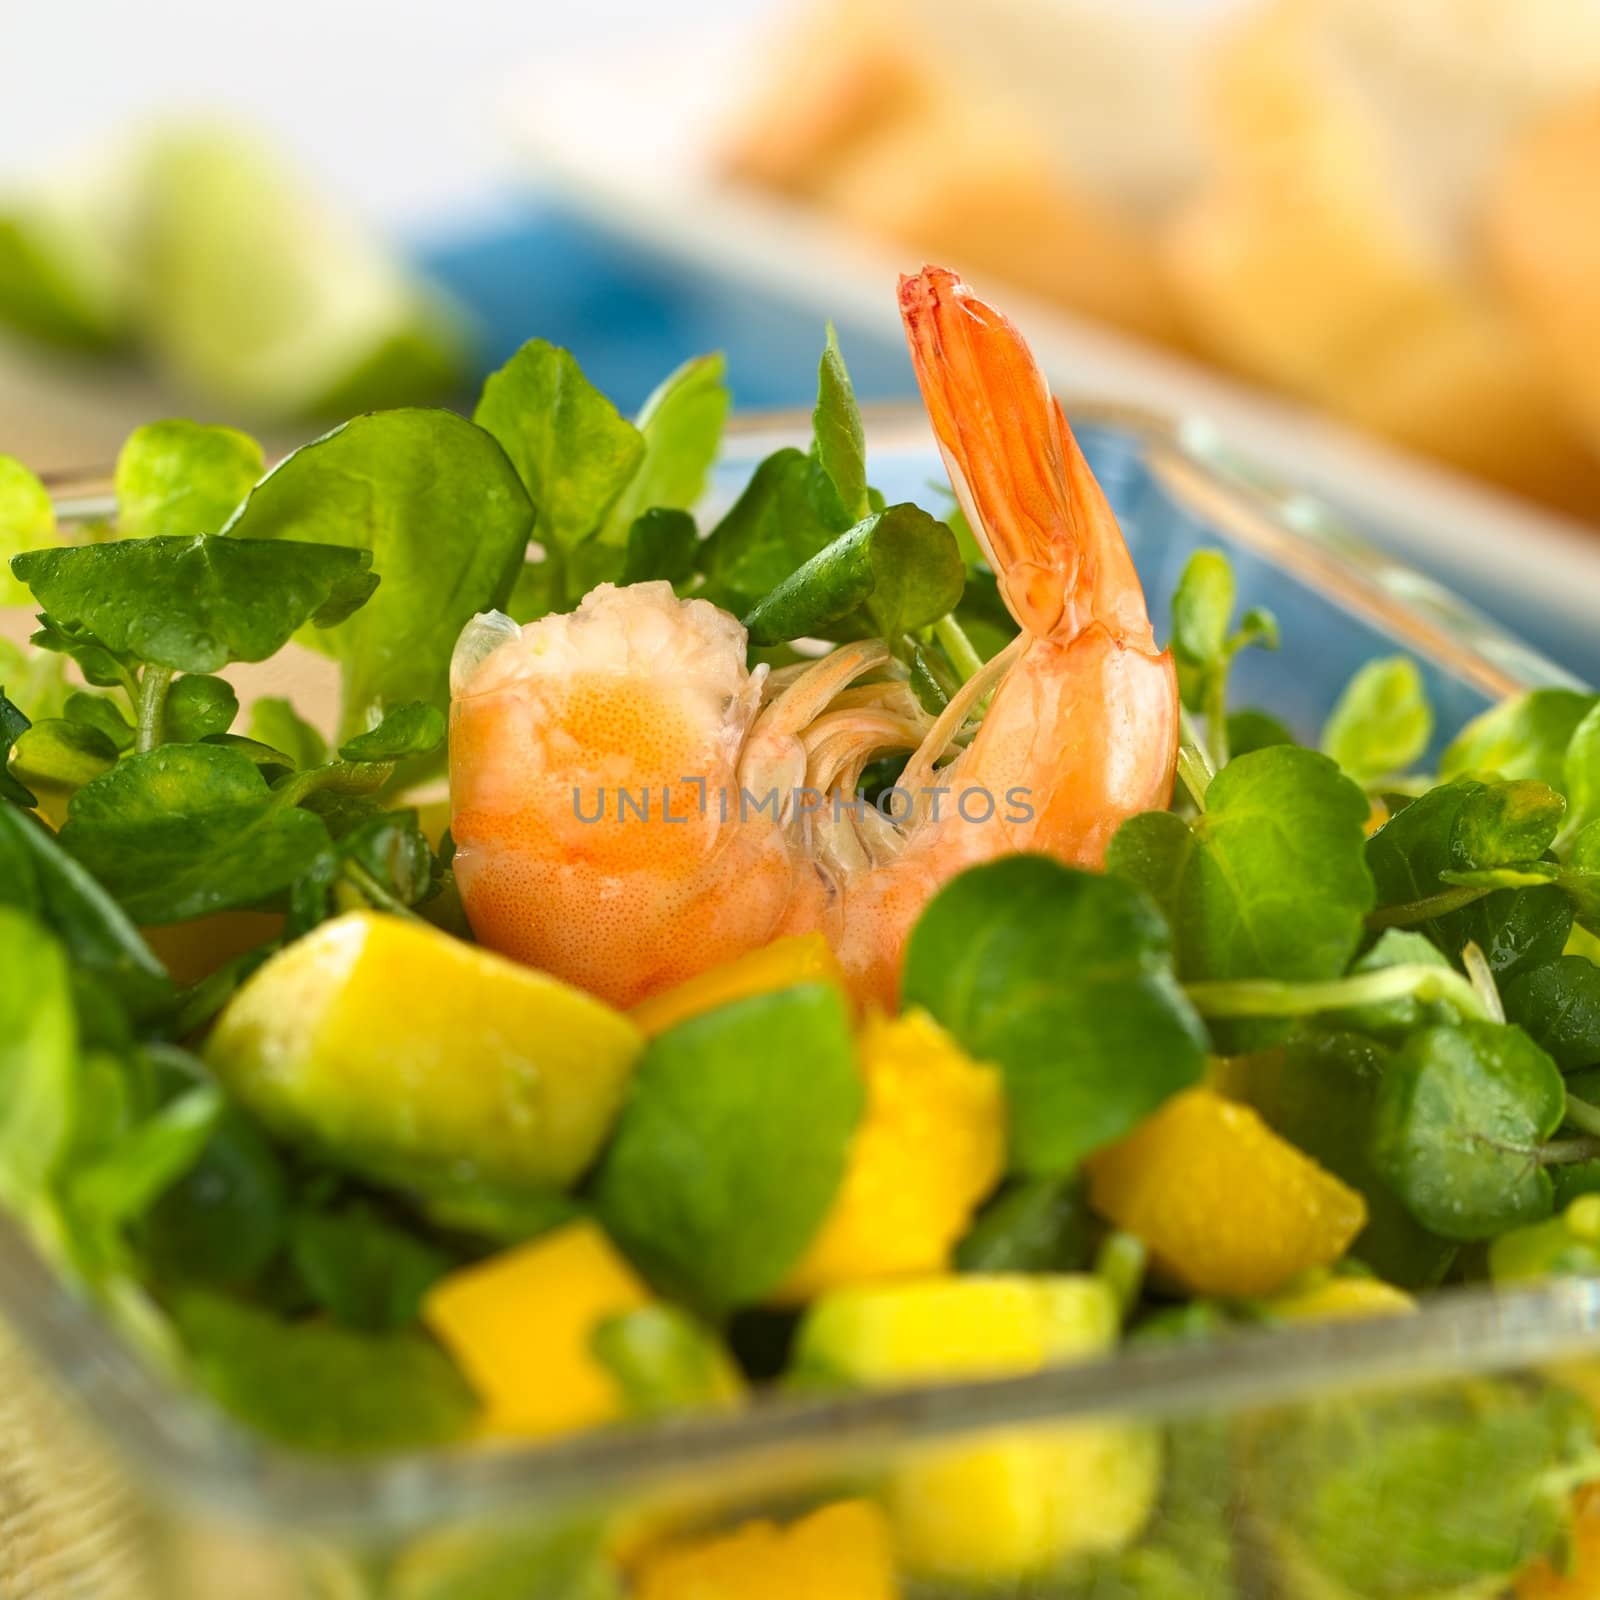 Shrimp on fresh watercress, mango and avocado salad in glass bowl with baguette in the back (Selective Focus, Focus on the shrimp)